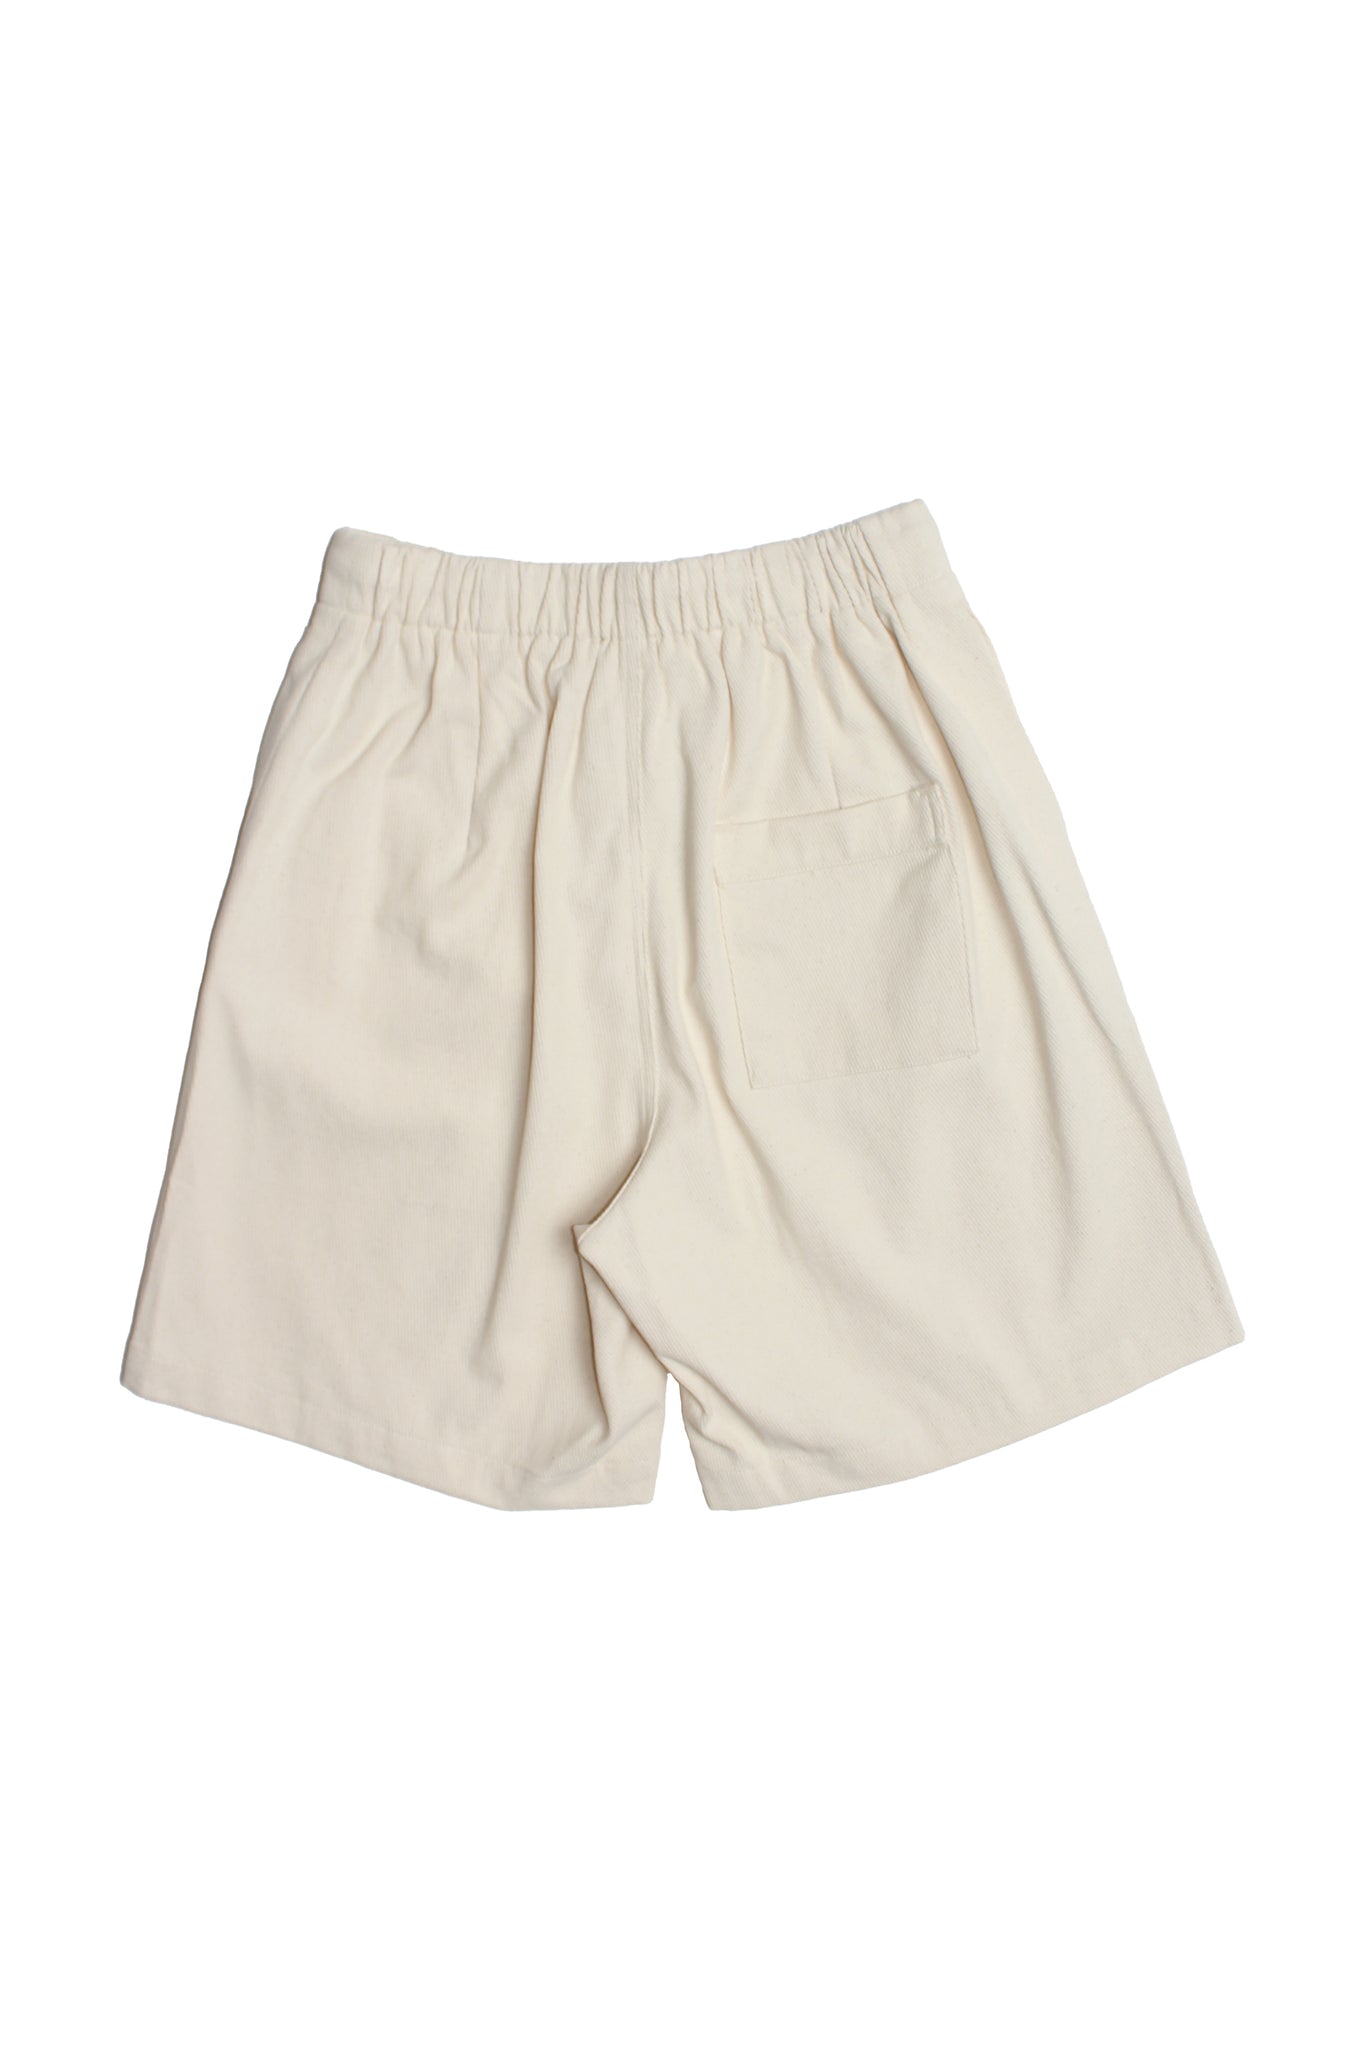 Maroon Twill Cotton Shorts In Natural